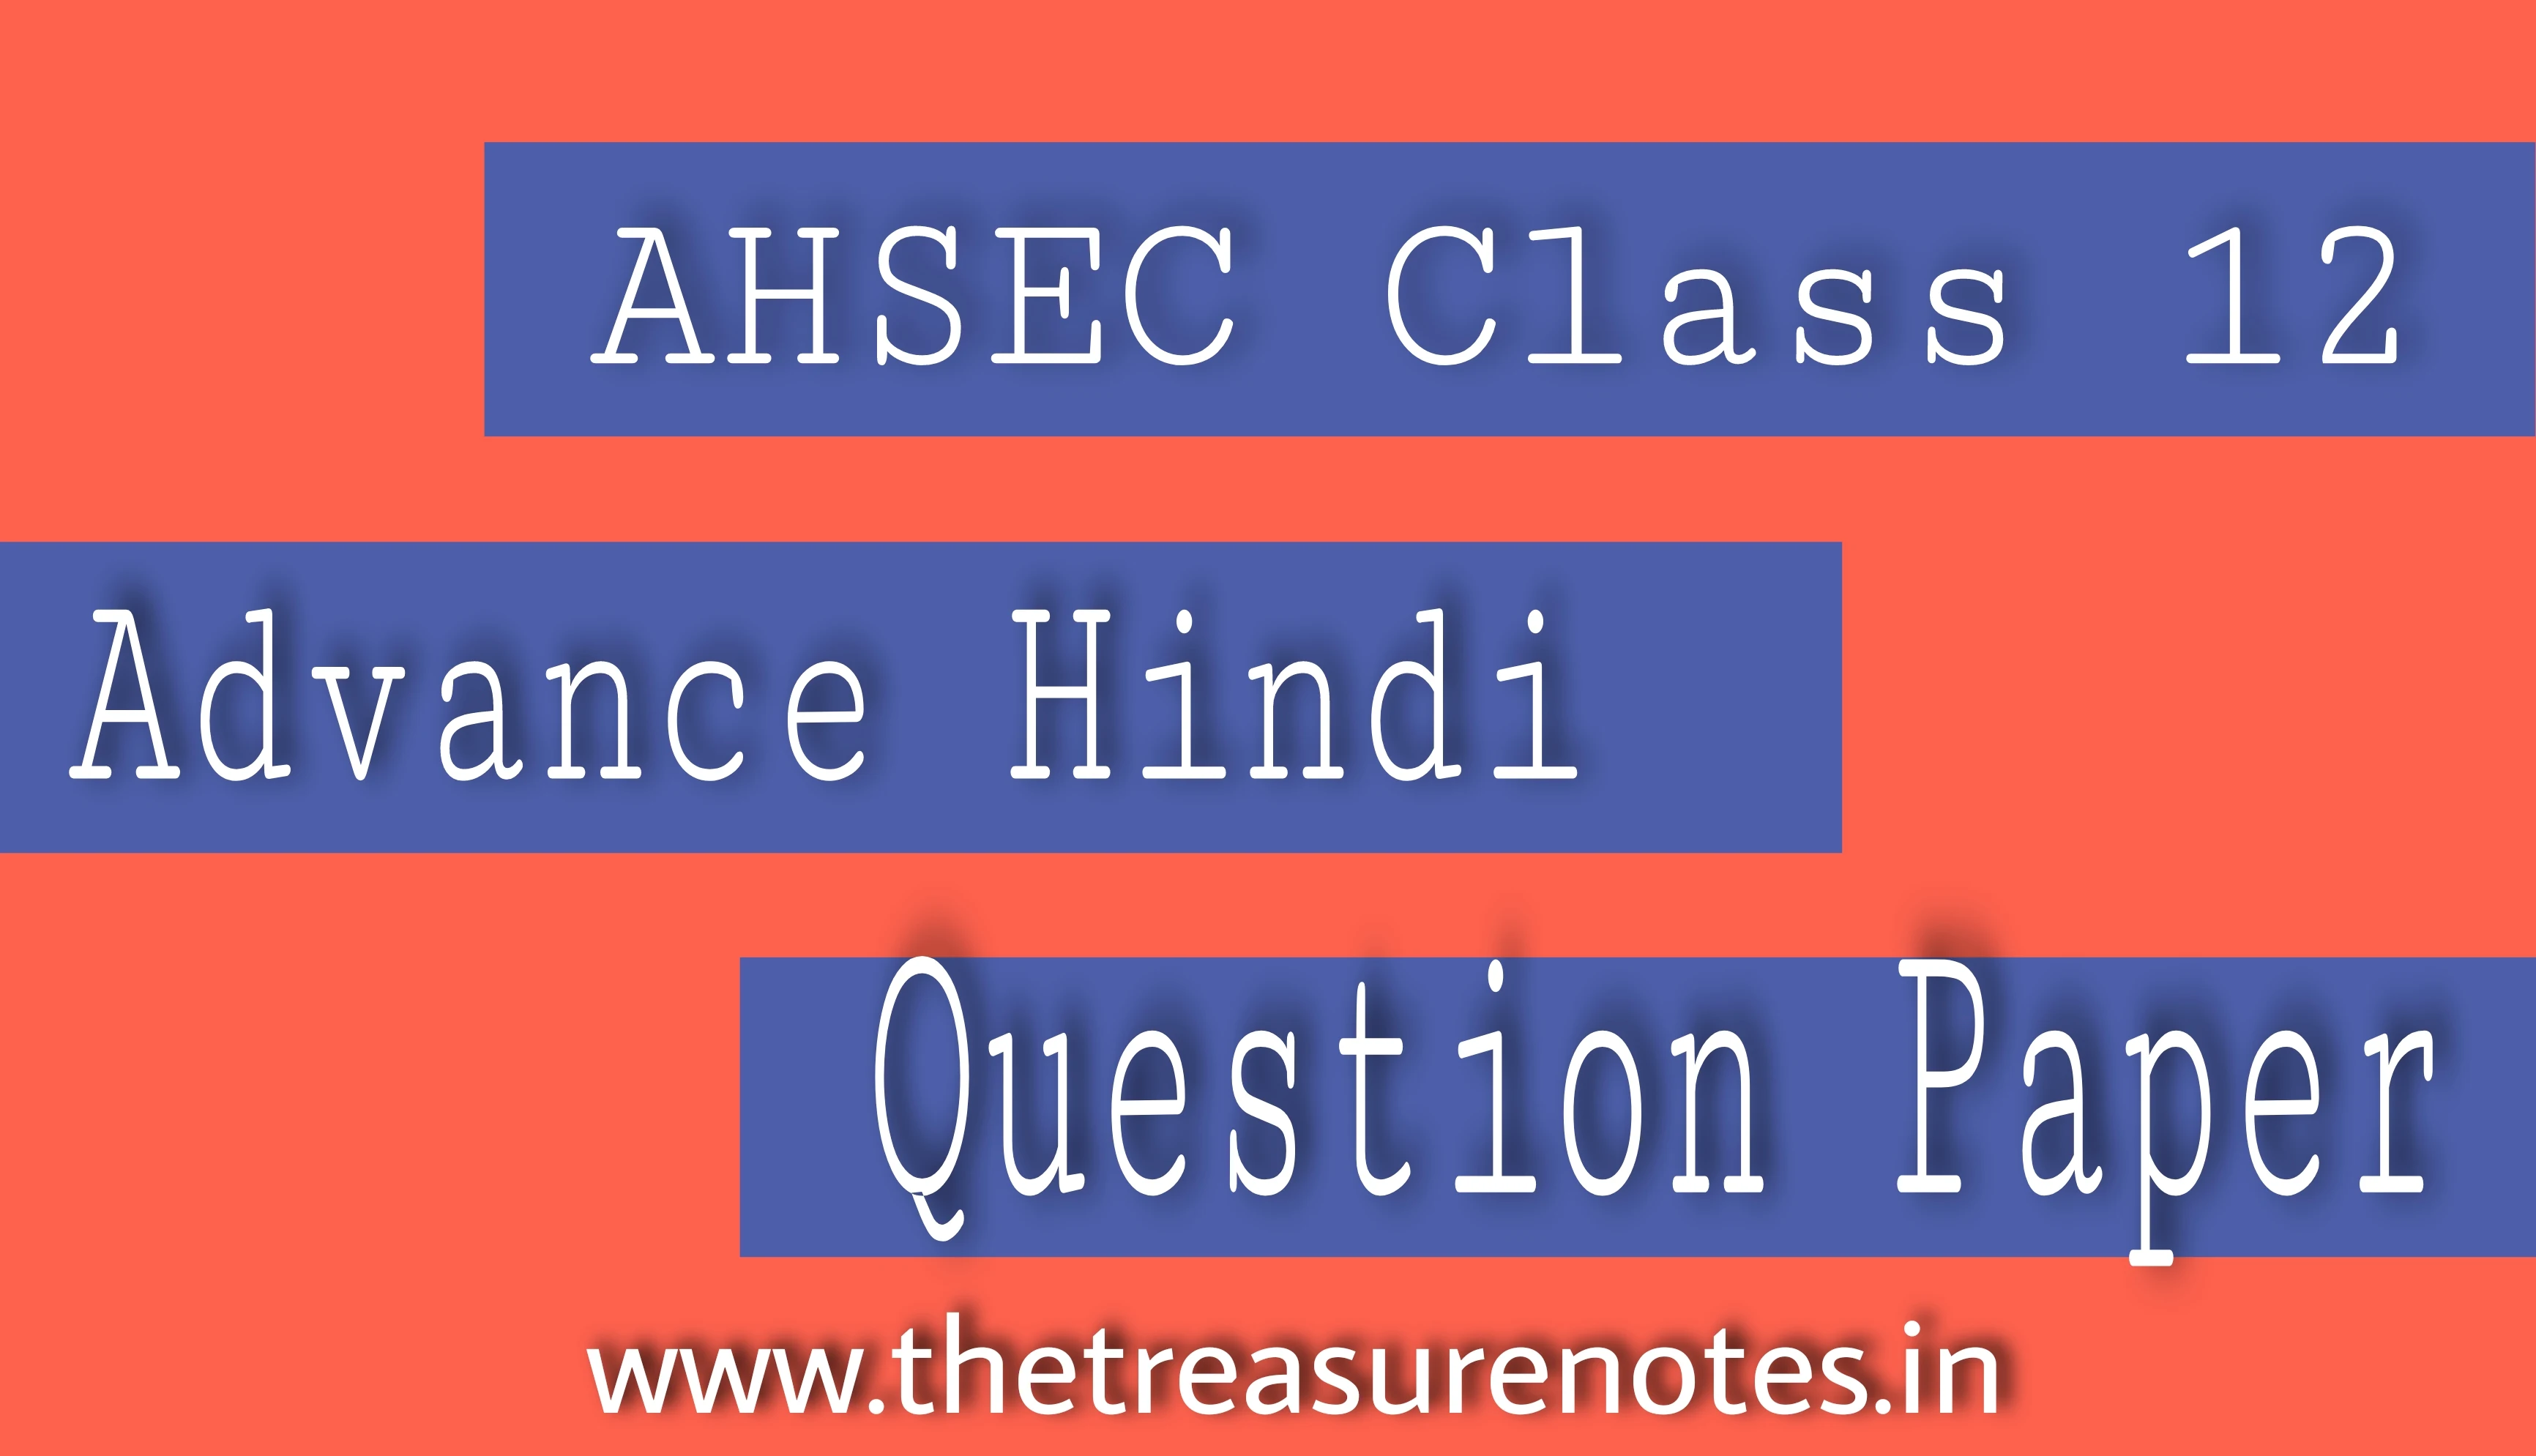 What type of Questions asked in AHSEC HS 2nd Year Advance Hindi Exams?  Theoretical and numerical both type of question asked in AHSEC HS 2nd Year Advance Hindi Examination.